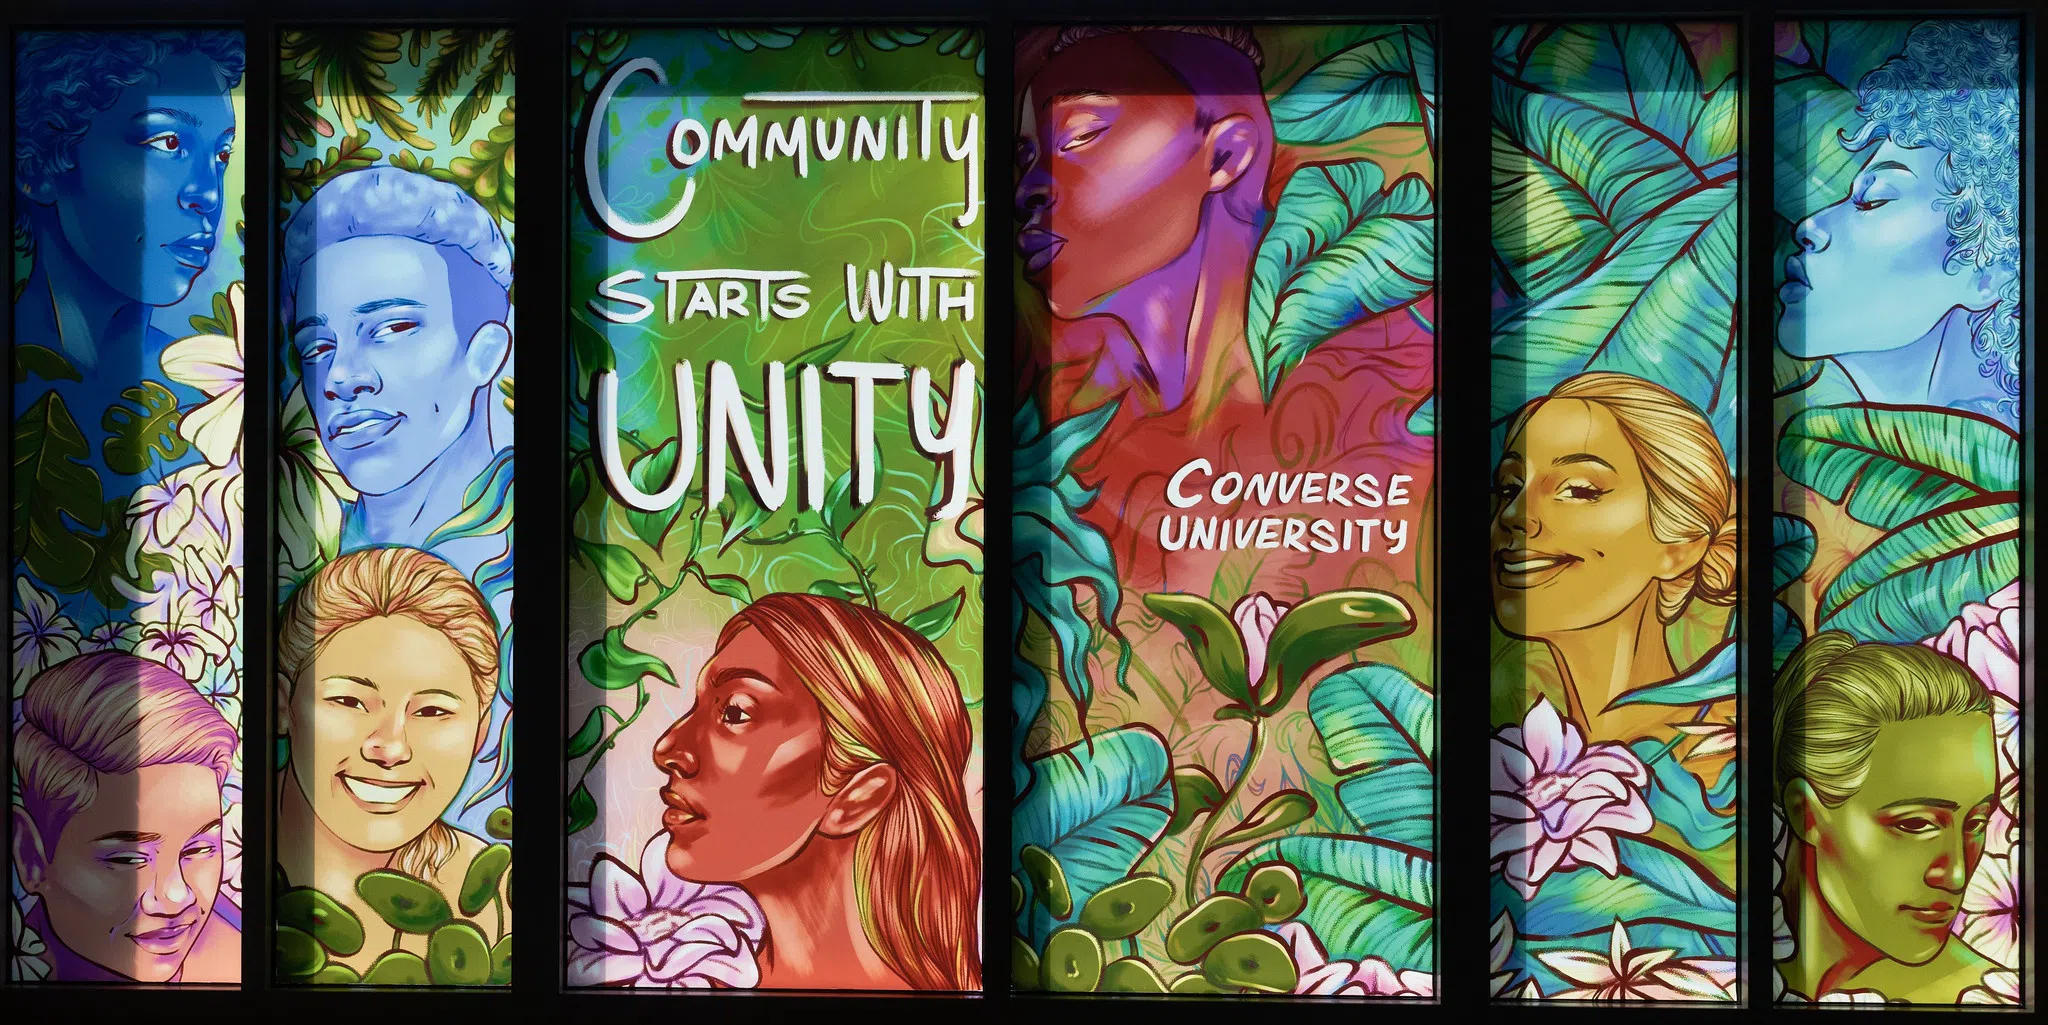 A six-paneled, painted window features a variety of diverse, multi-colored faces and the words: "Community Starts With Unity", as well as "Converse University".